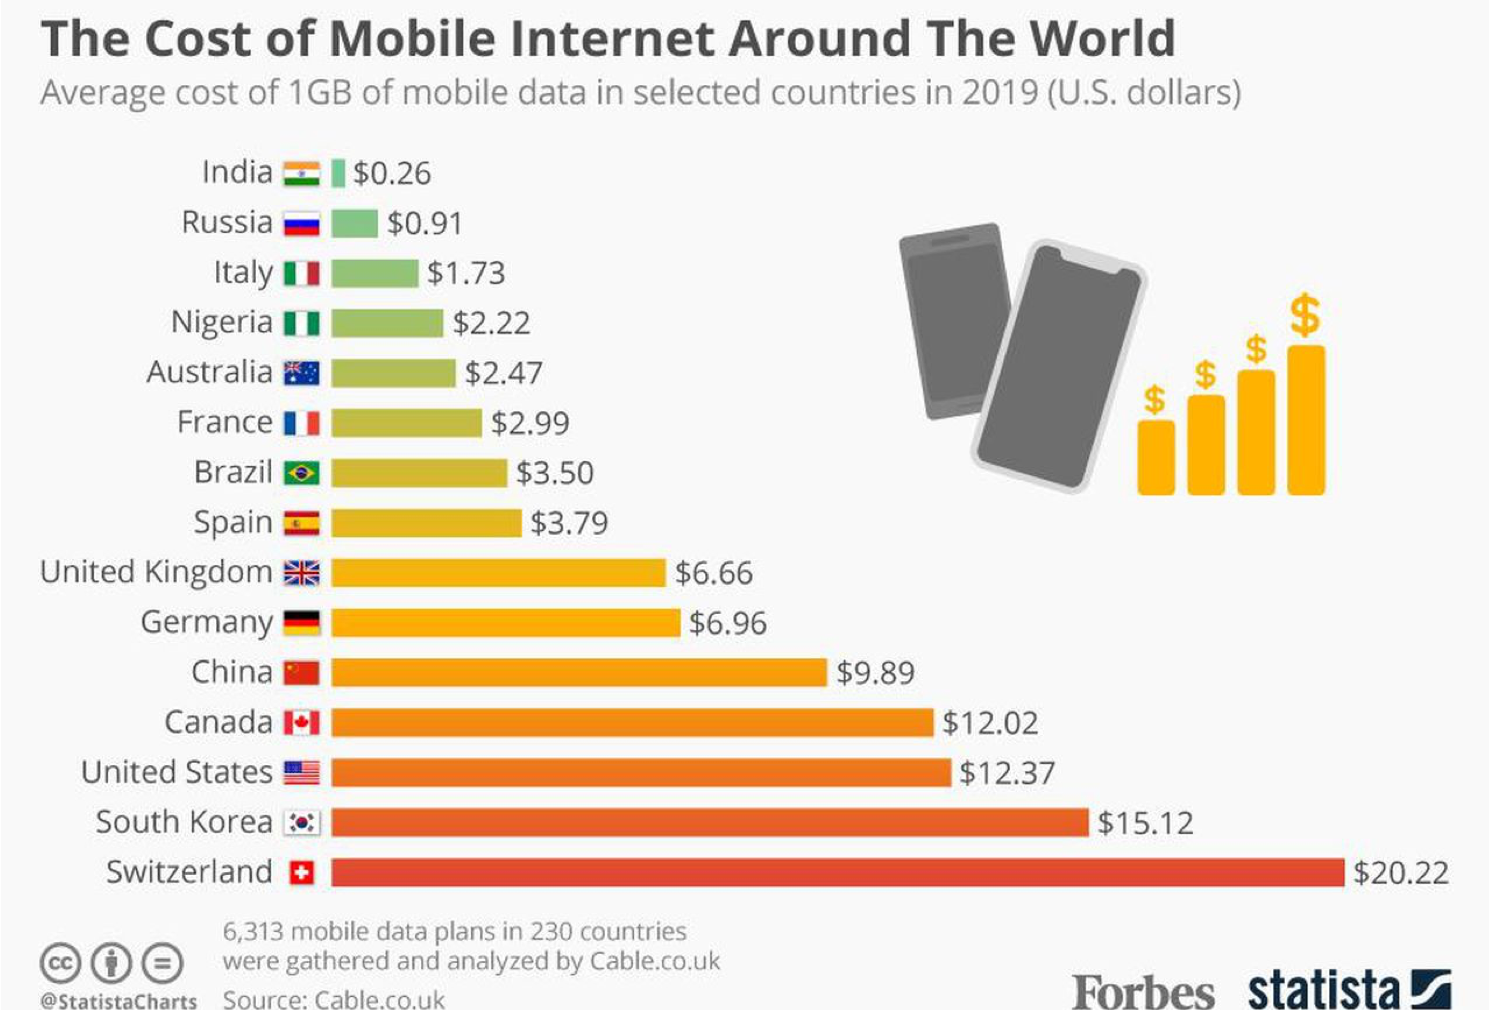 Cost of mobile data around the world